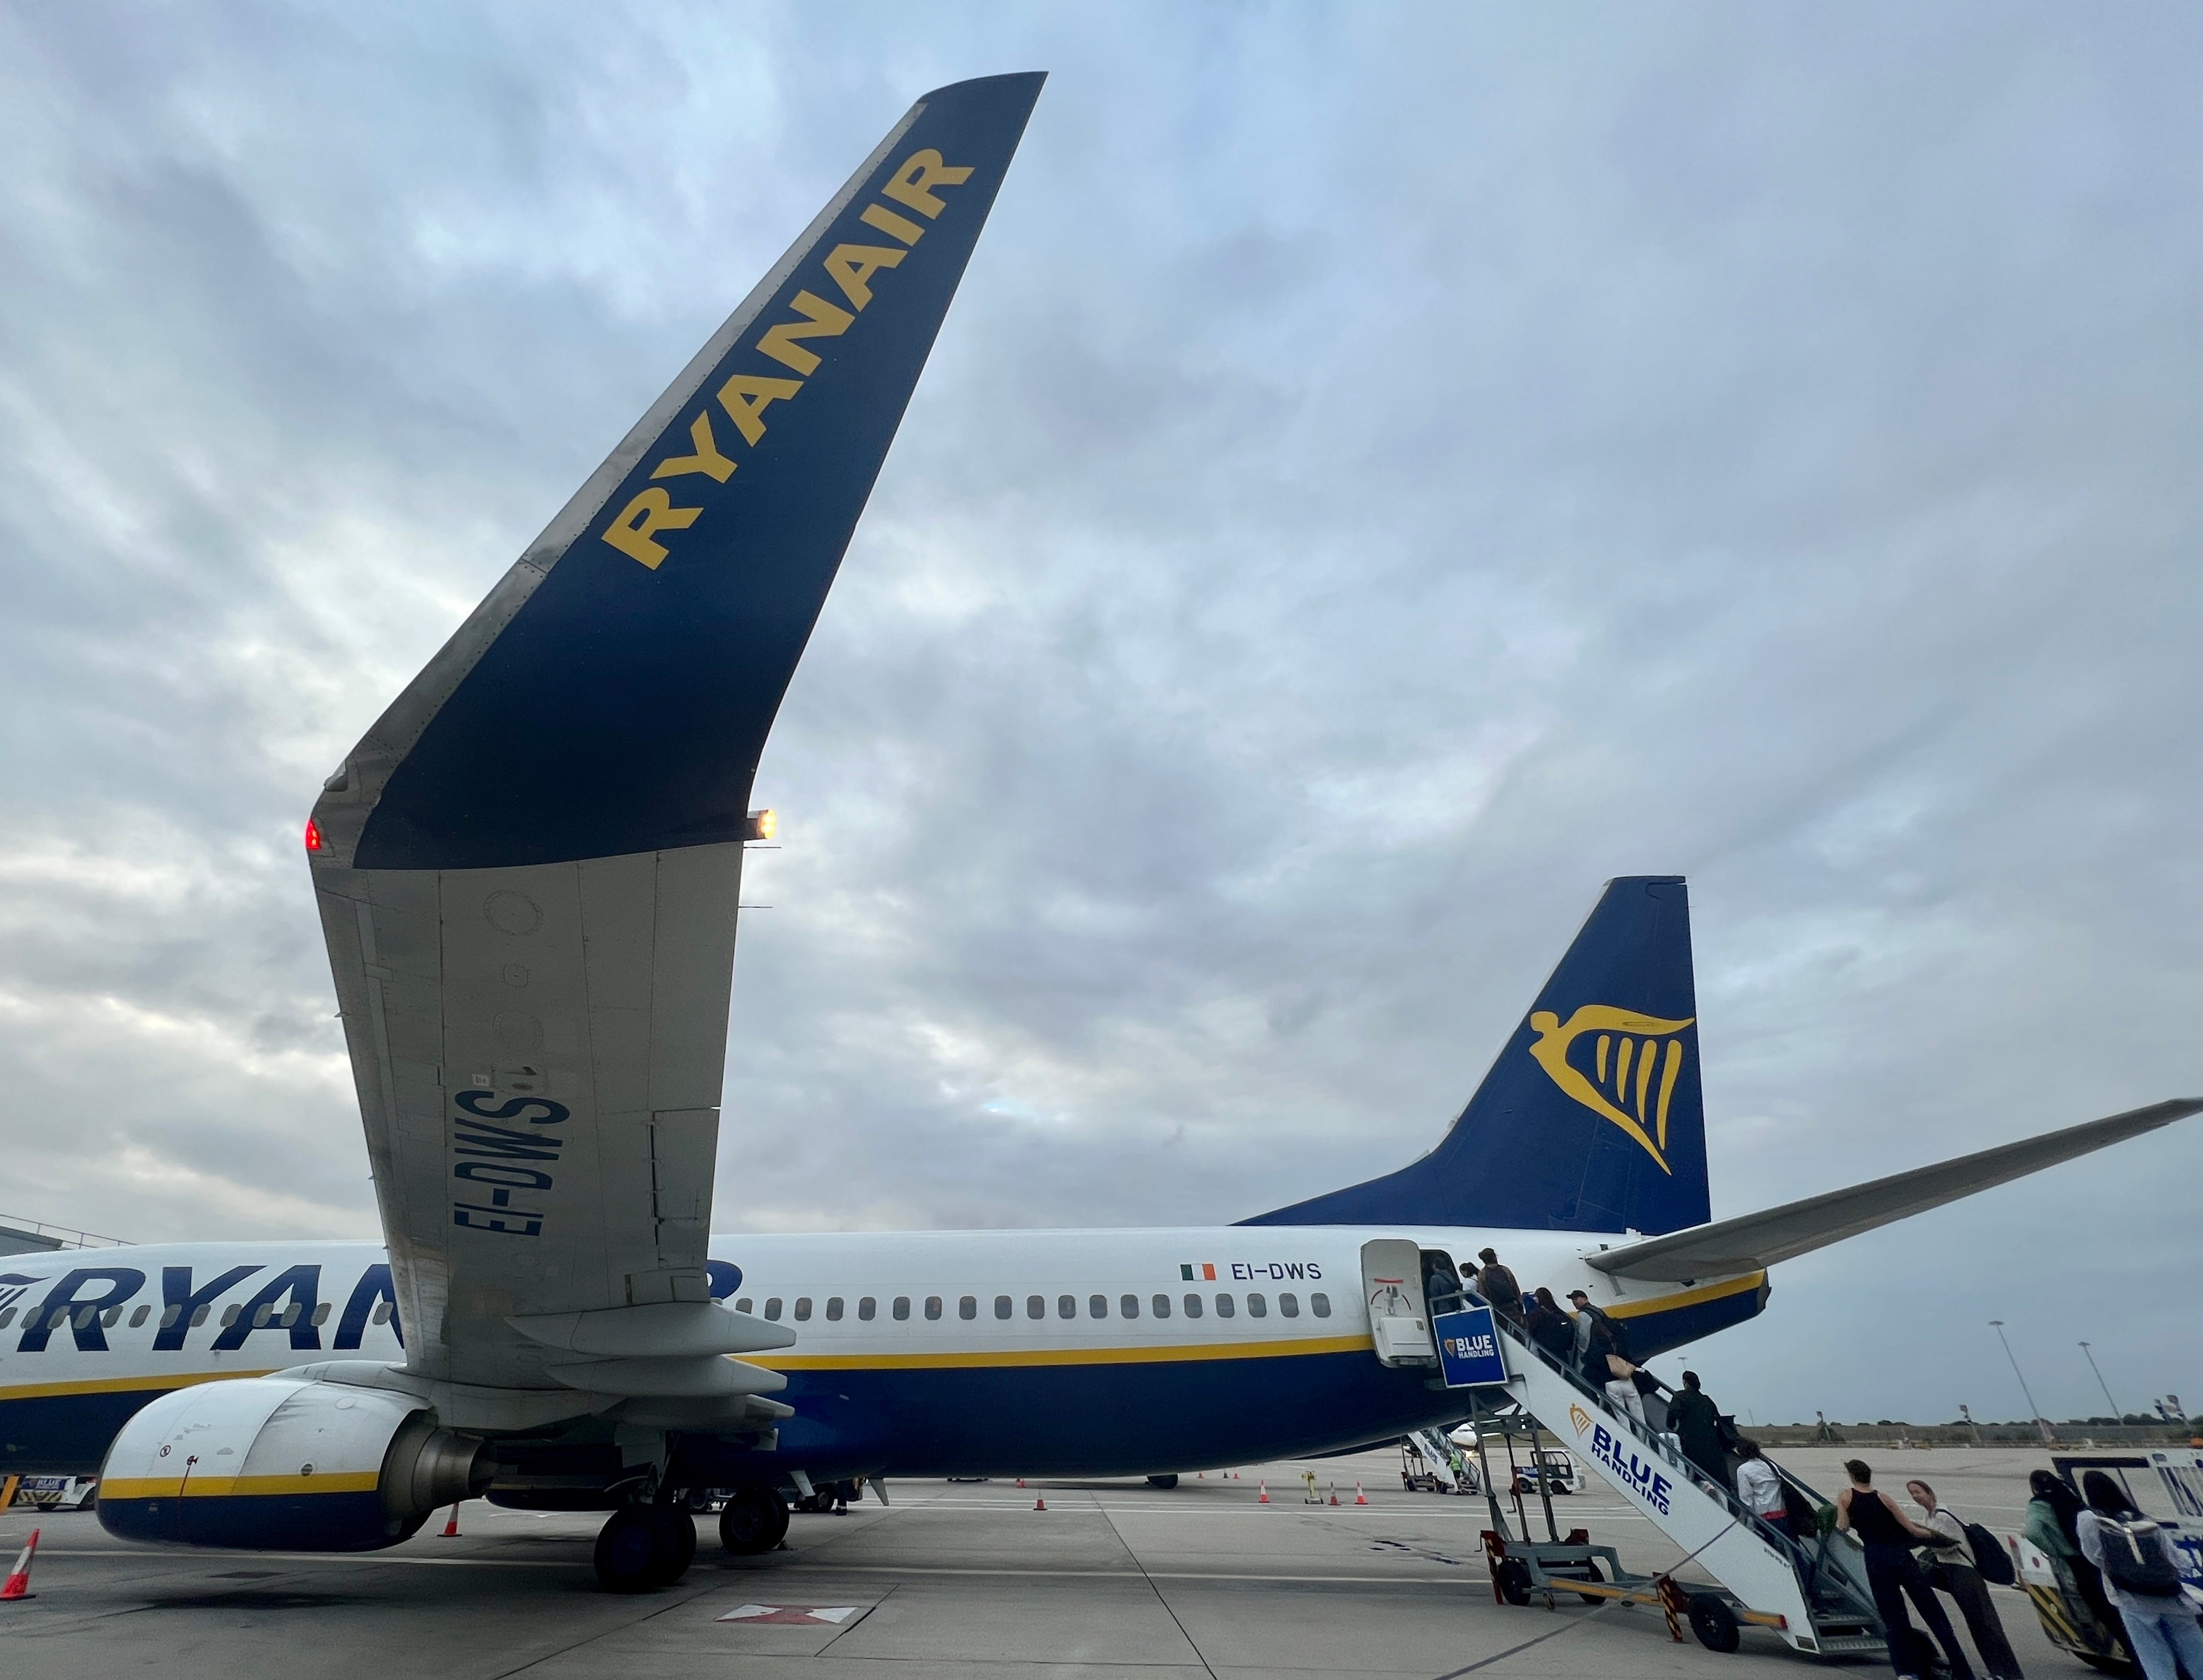 Boarding now: passengers boarded Ryanair flights at an average rate of 400 per minute during the summer